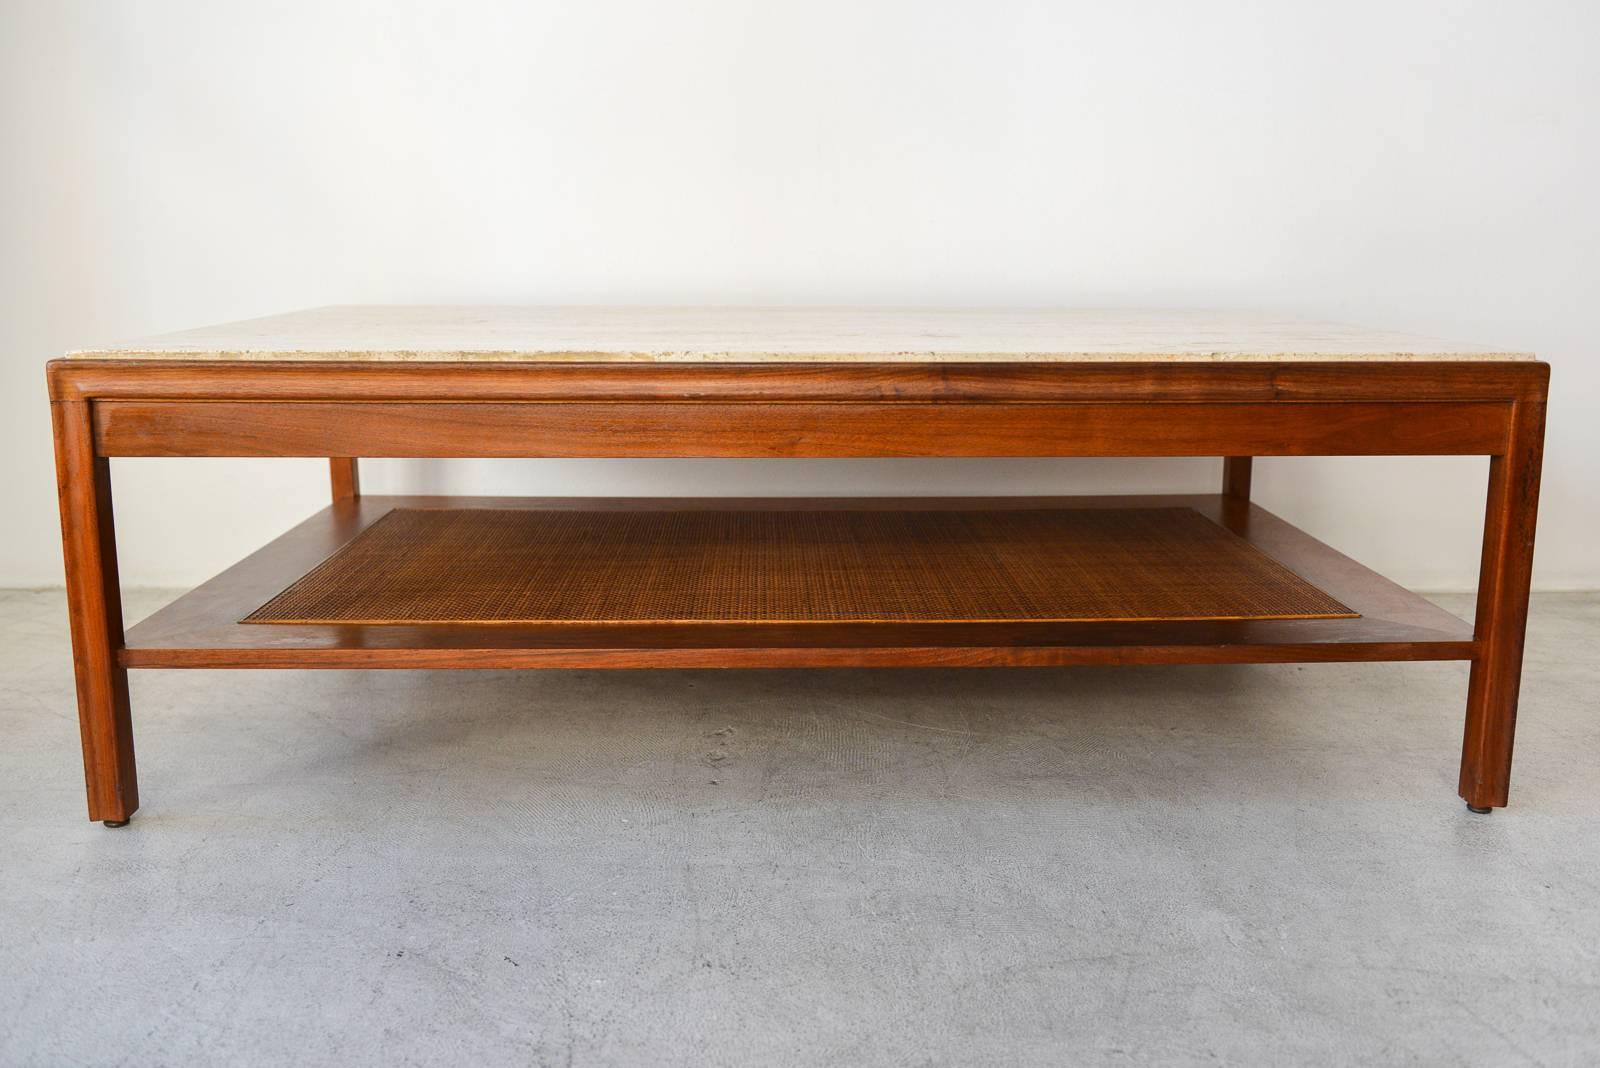 Beautiful walnut, travertine and cane coffee table by Gerry Zanck, circa 1957. Lower shelf with cane in perfect condition, beautiful walnut grain and travertine in good condition. (One small chip, see photo 10, not highly noticeable but we could